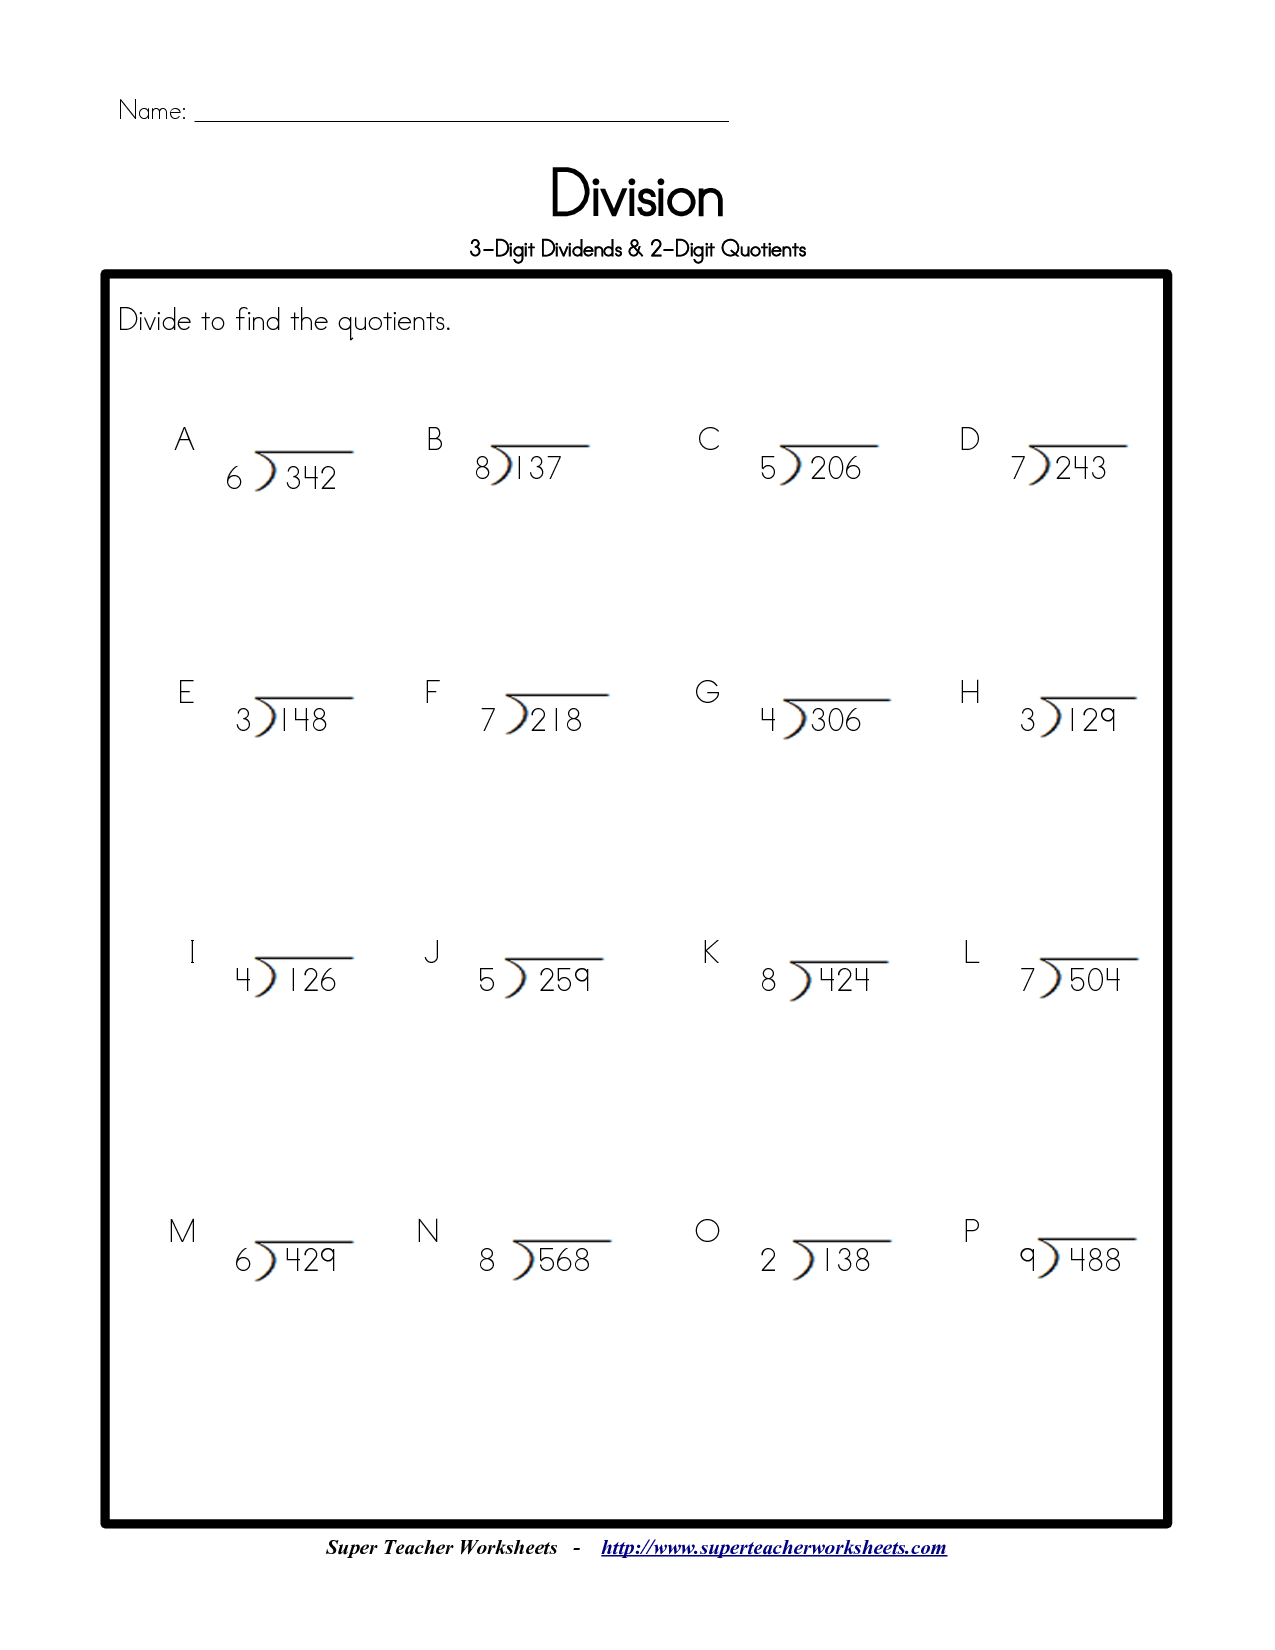 15 Best Images Of Free Division Worksheets For 5th Grade 